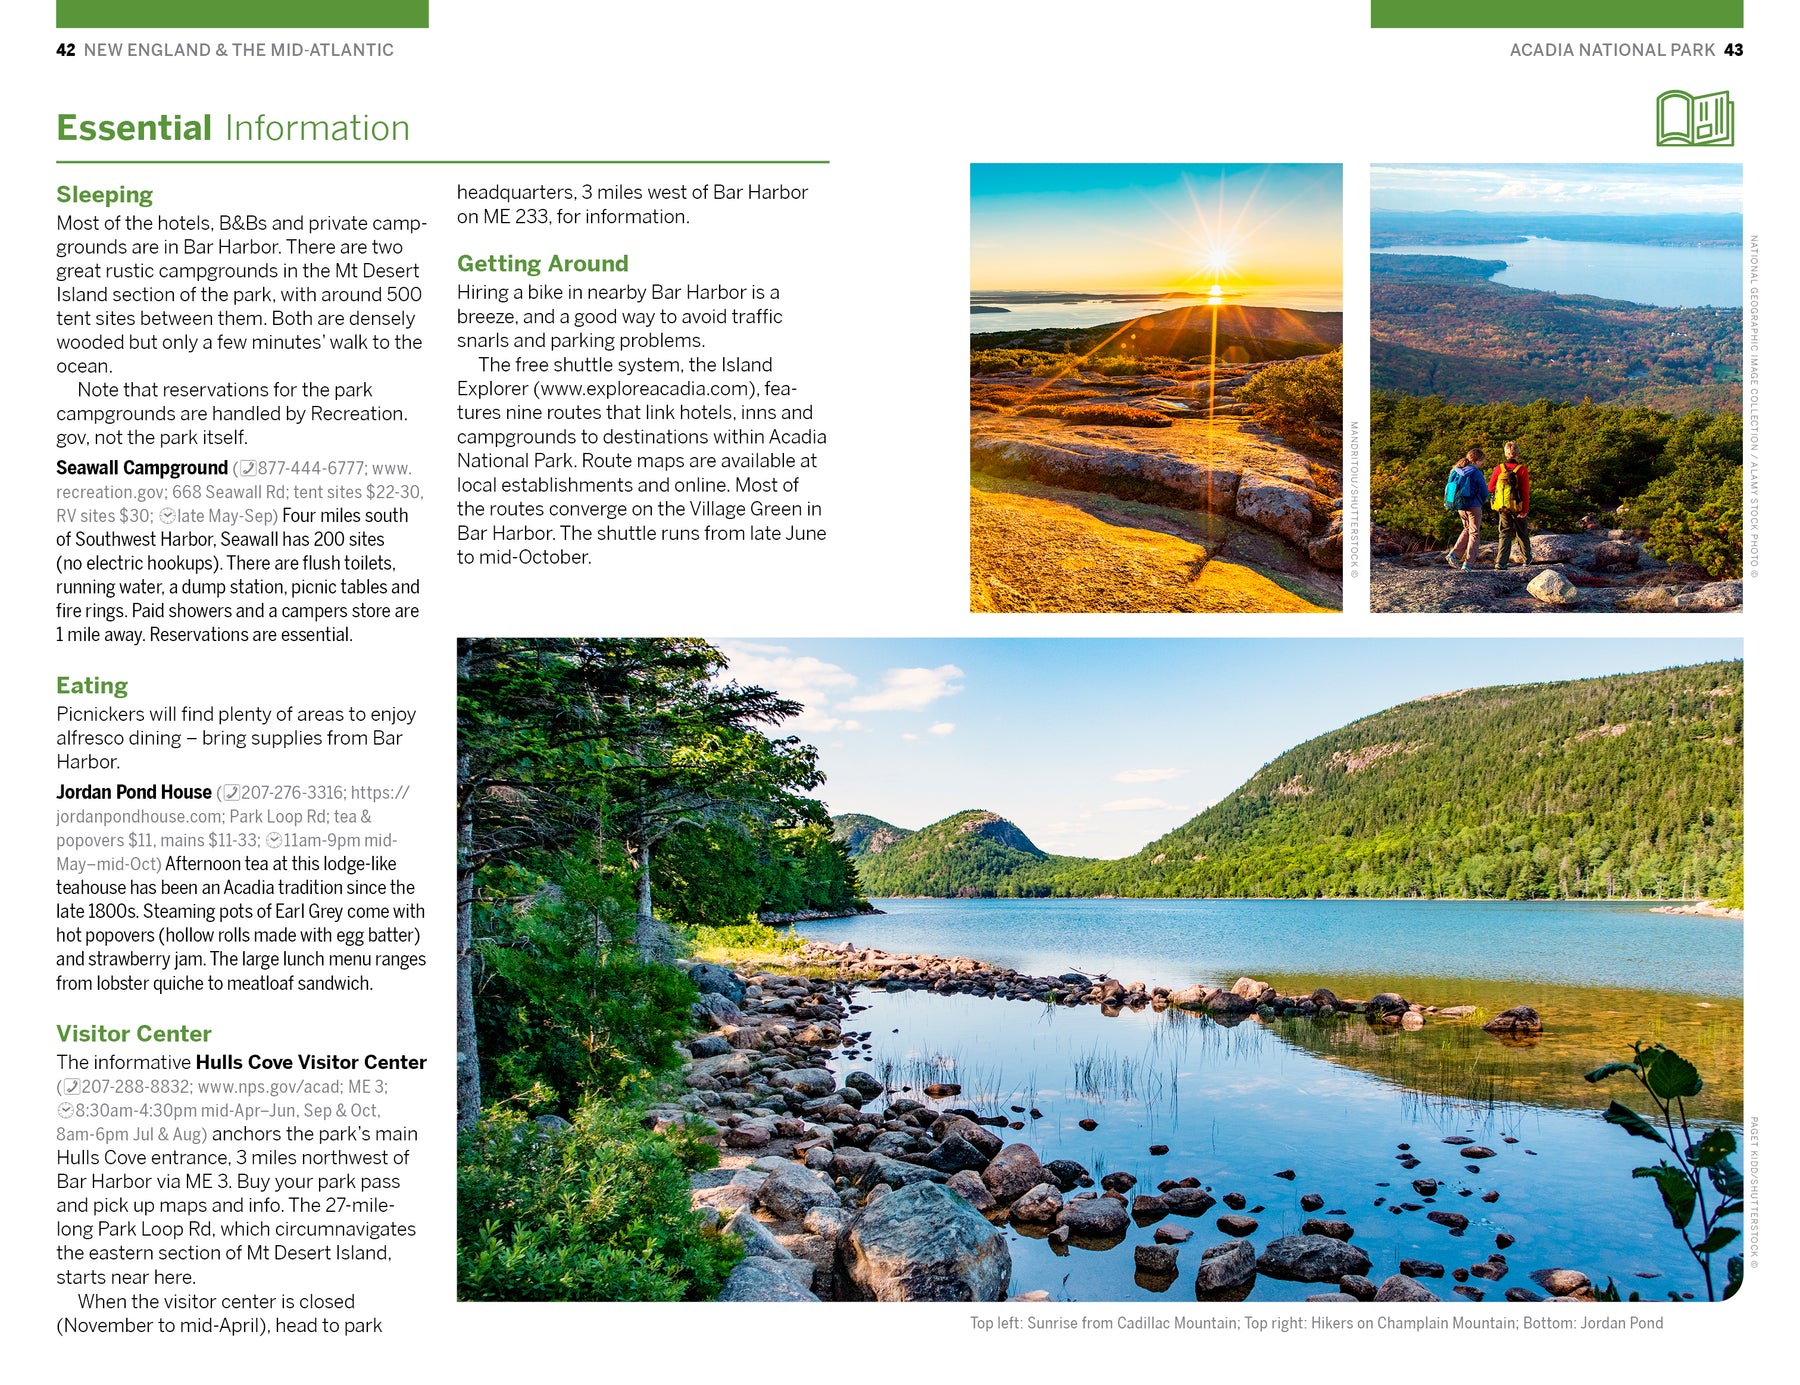 New England & the Mid-Atlantic's National Parks